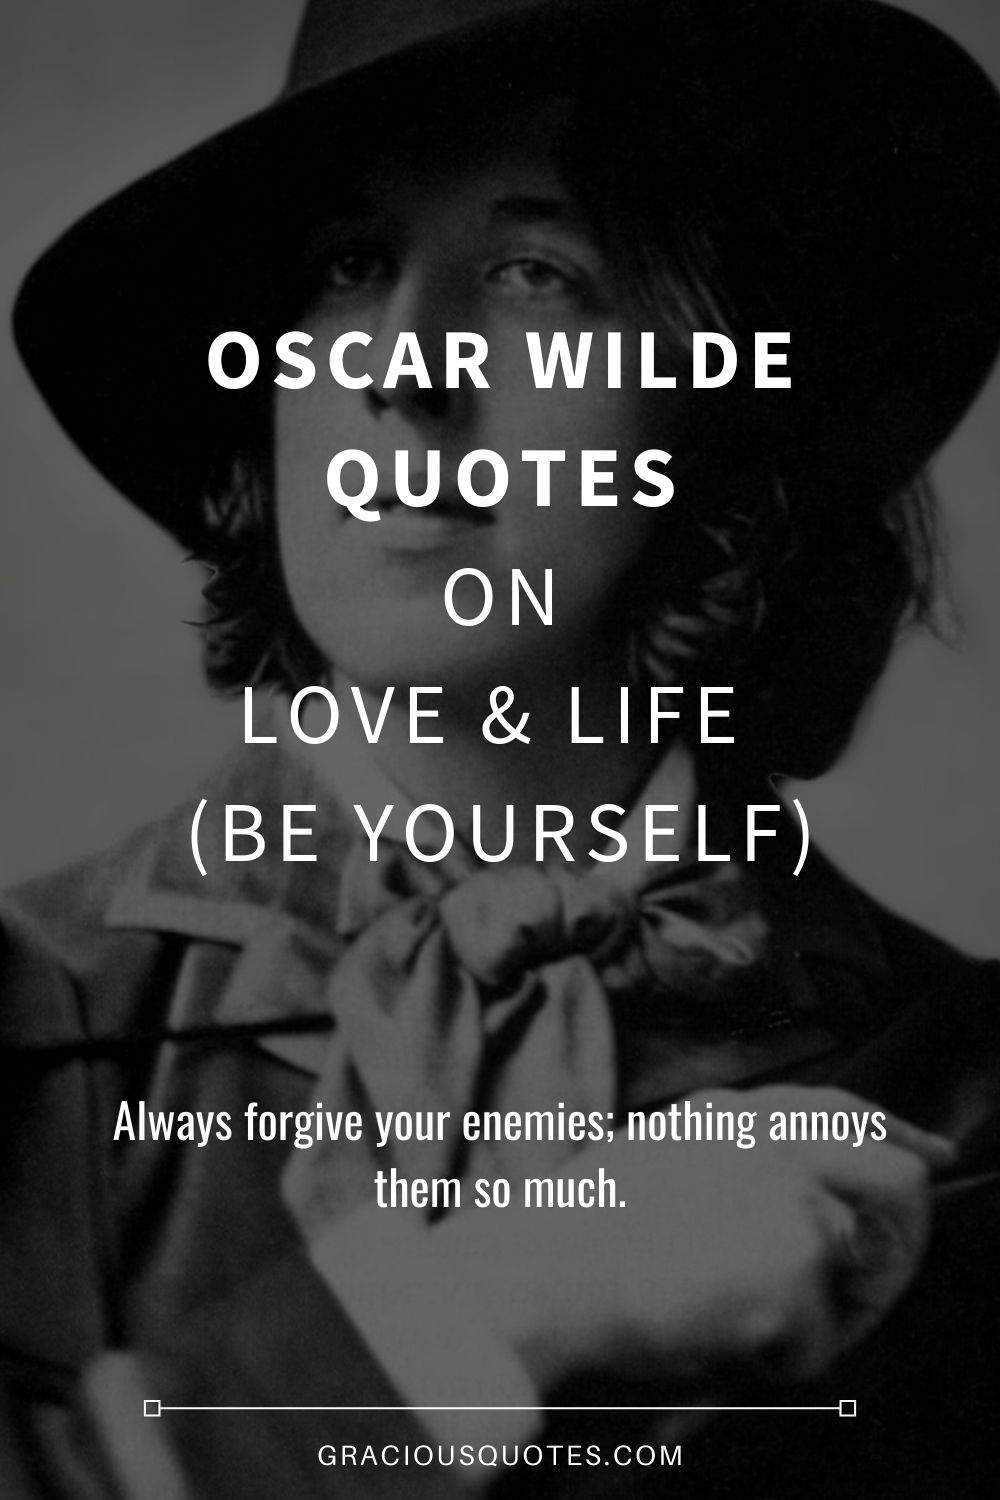 Oscar Wilde Quotes on Love & Life (BE YOURSELF) - Gracious Quotes